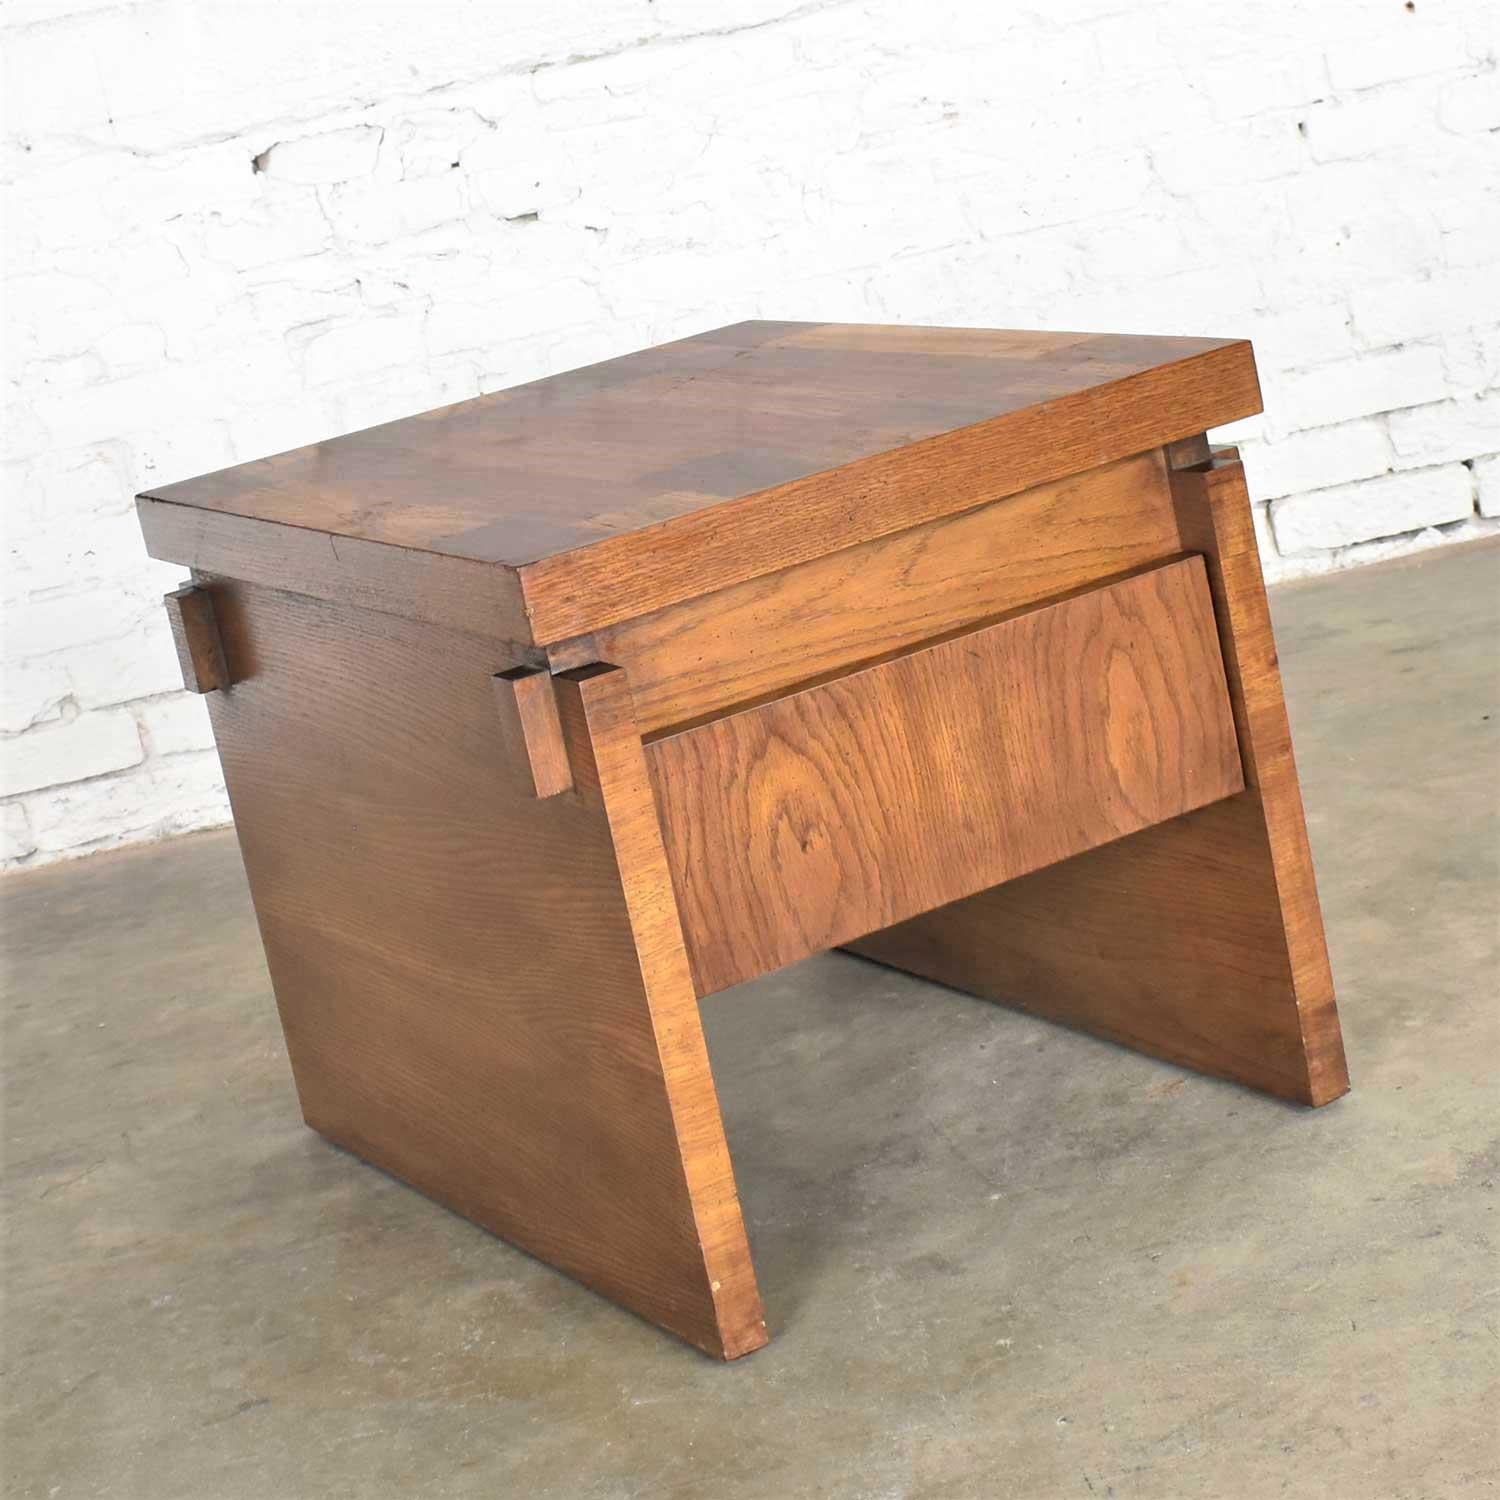 Handsome chunky oak Brutalist end table or side table with parquet top and drawer by Lane. It is in wonderful vintage condition with no outstanding flaw we have detected. Only expected age appropriate wear including small scratches and dings. Please